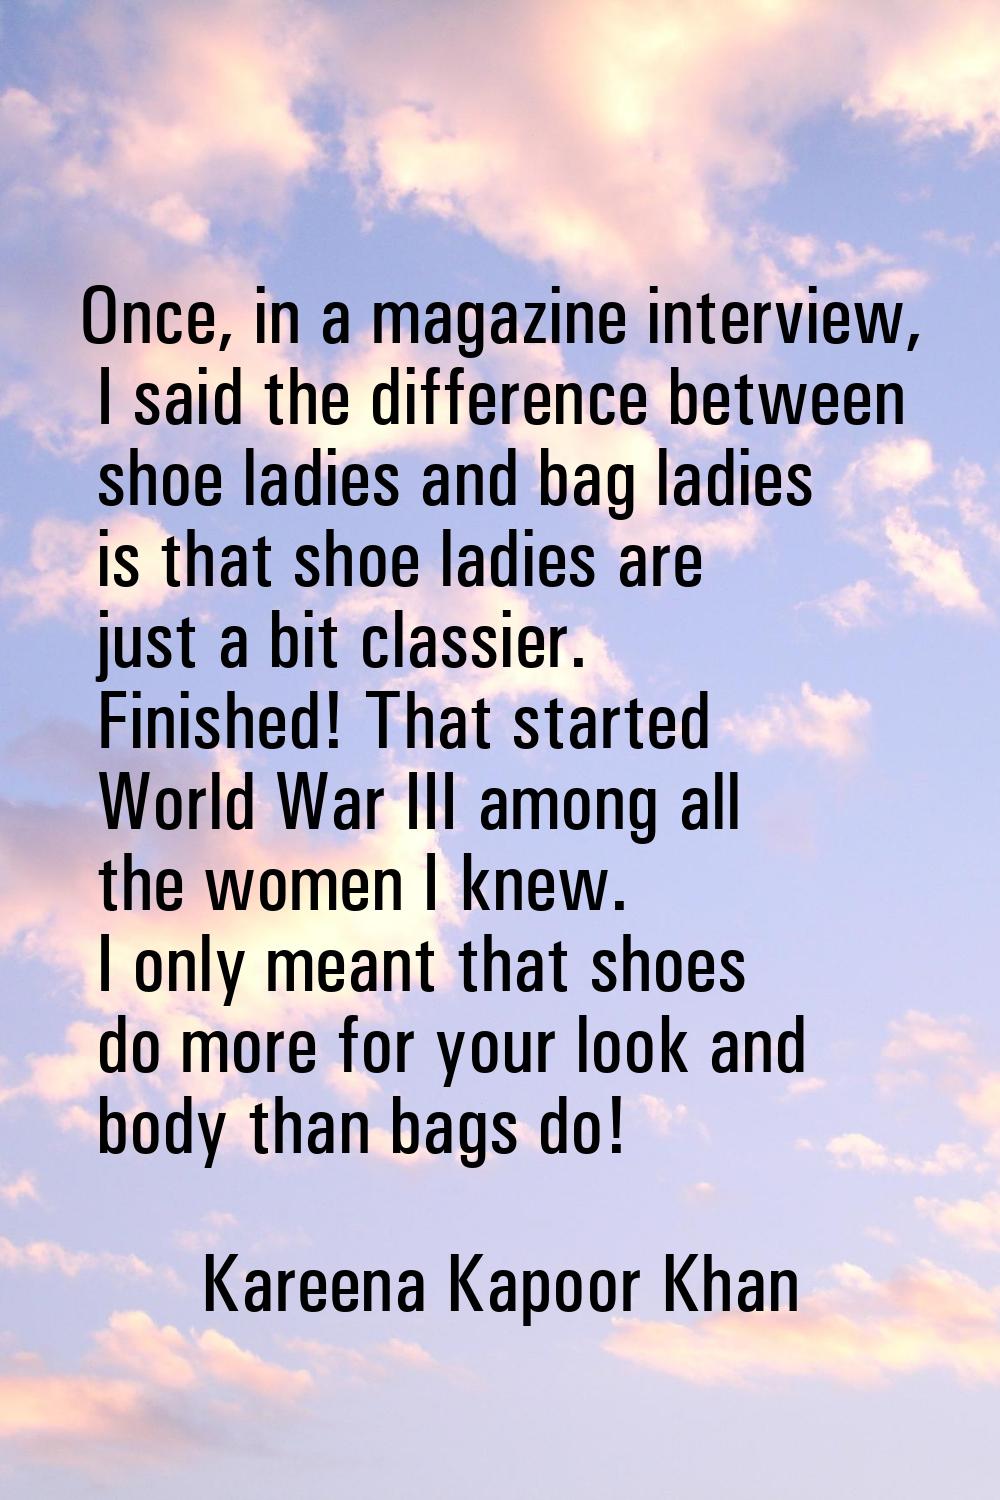 Once, in a magazine interview, I said the difference between shoe ladies and bag ladies is that sho